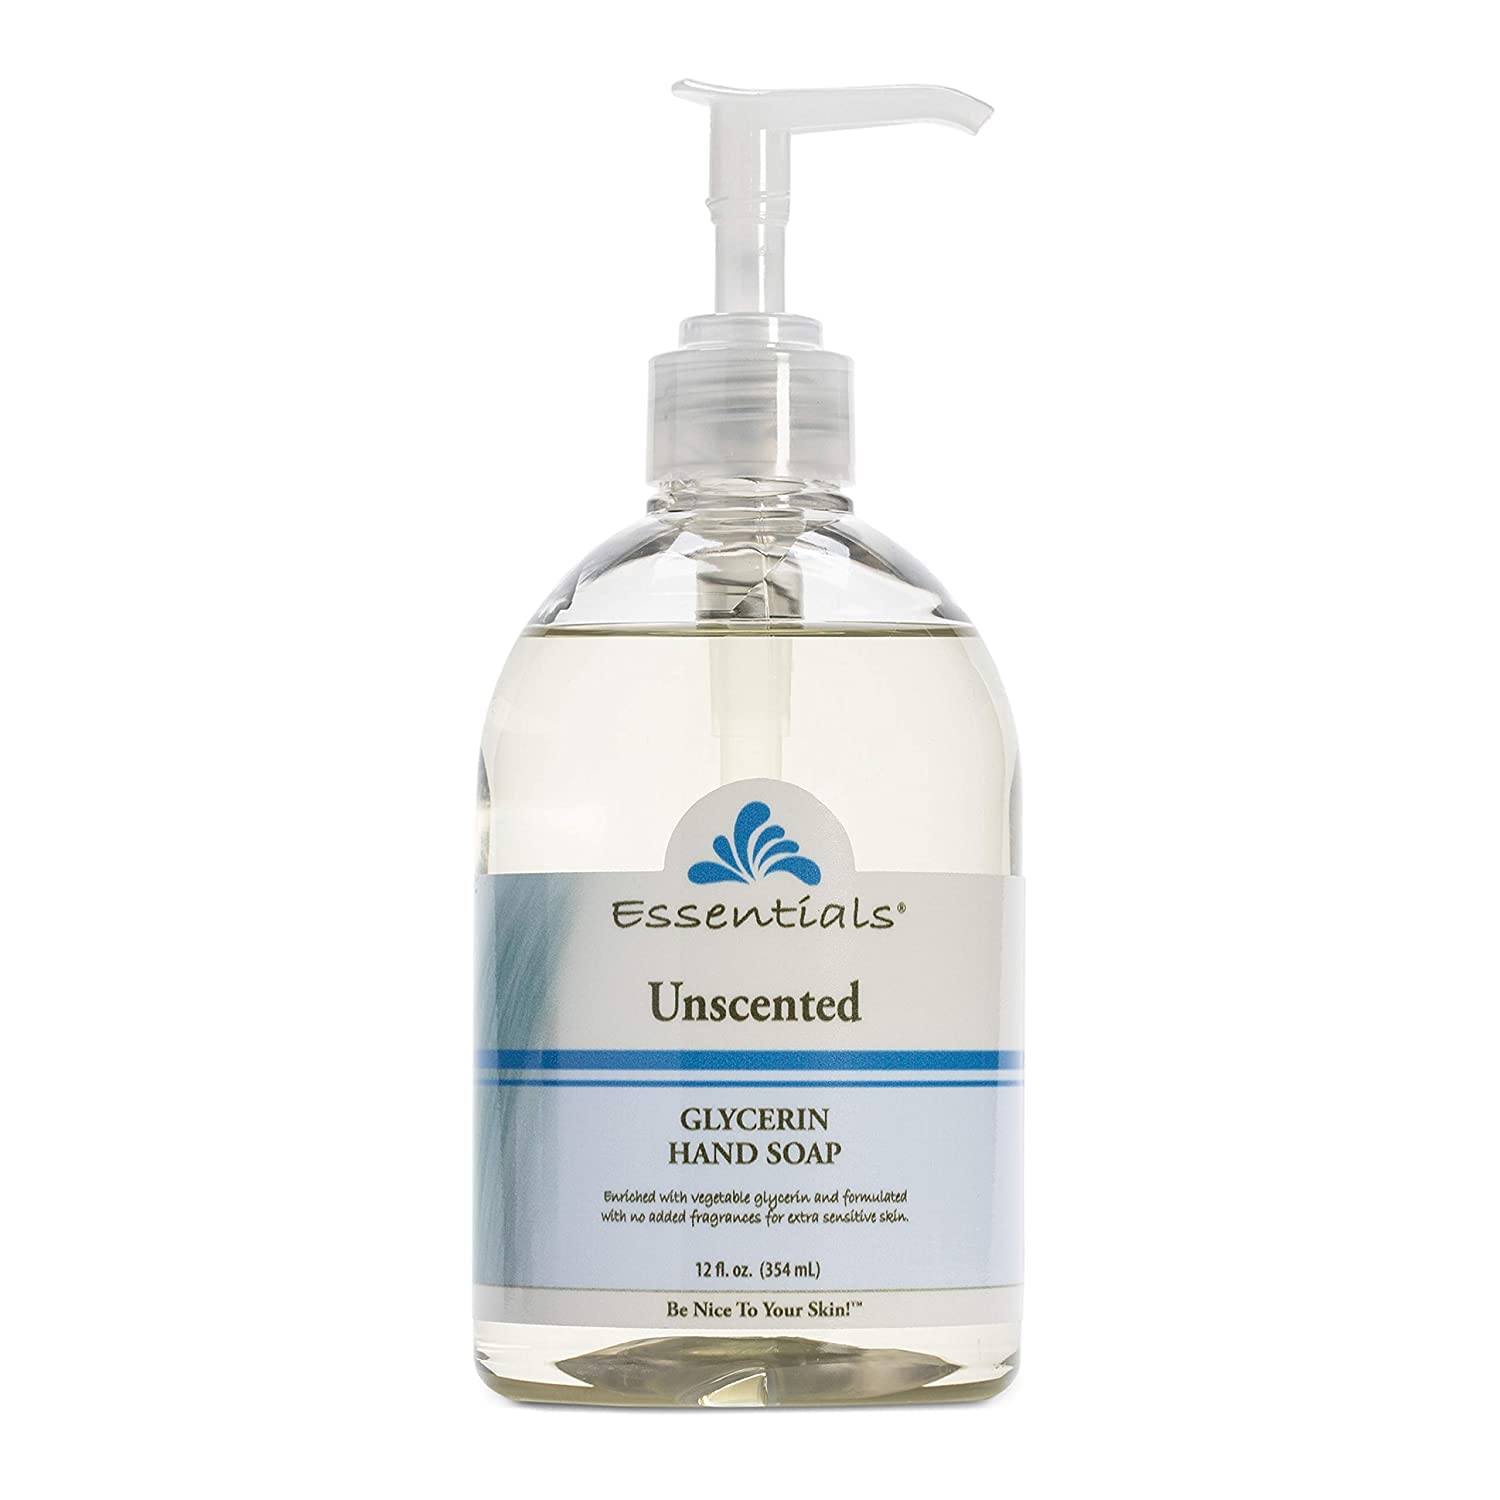 Clearly Natural Unscented Liquid Soap 12 Ounce - 6 per case.6